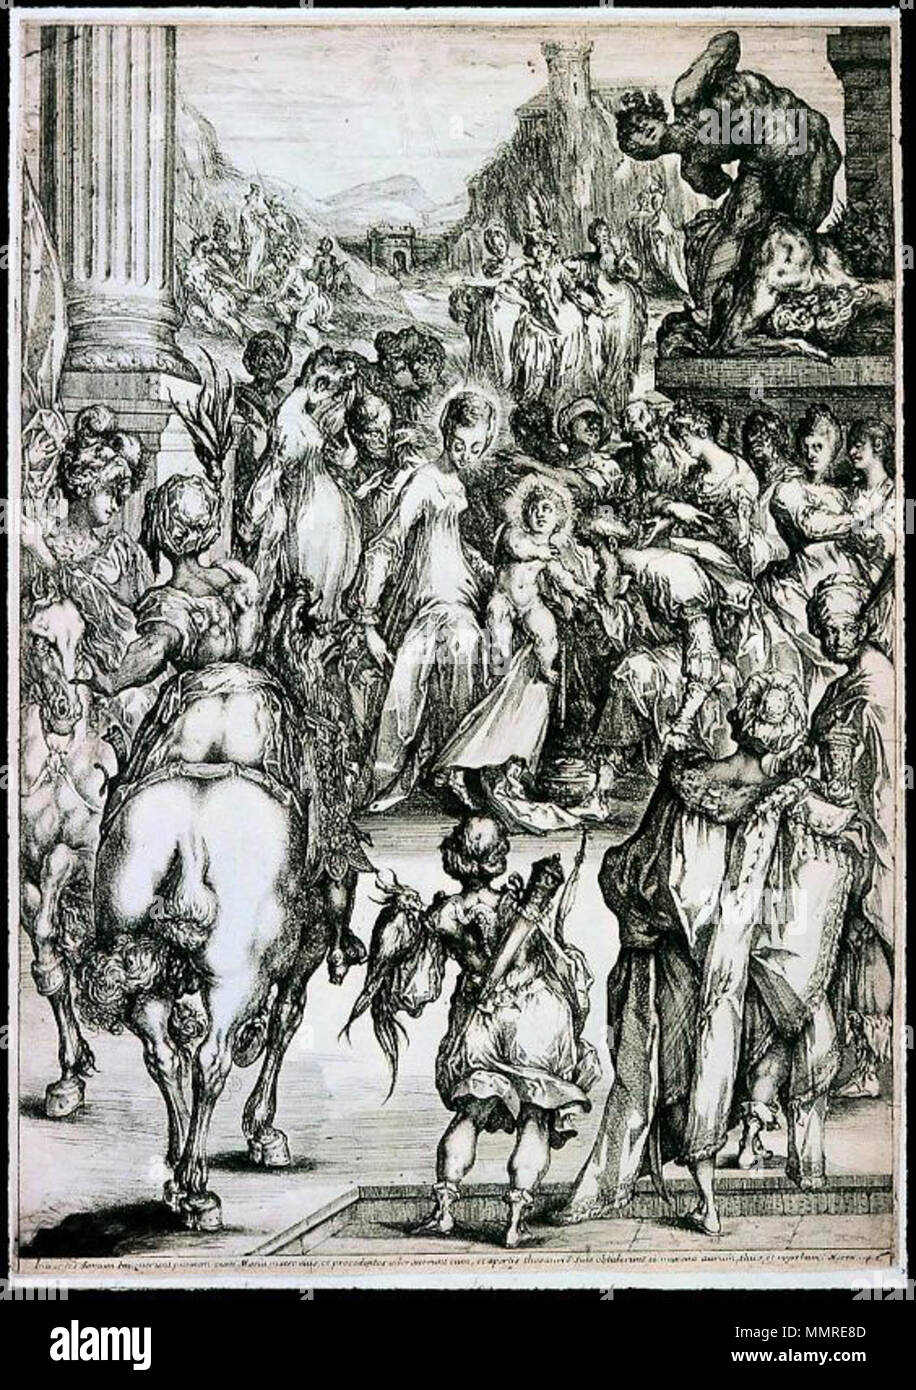 . English: The Adoration of the Magi Jacques Bellange, French (Lorraine), active in 1595, died in 1616 Platemark: 60.5 x 42.8 cm (23 13/16 x 16 7/8 in.); Sheet: 61 x 43.4 cm (24 x 17 1/16 in.) (trimmed irregularly) Etching and burin; fifth state Classification: Prints Catalogue: Robert-Dumesnil 02; Walch 20; Reed-Worthenthird 32; fifth state Accession number: 40.106  . between 1600 and 1616.   Jacques Bellange  (1575–1616)     Alternative names Jacques de Bellange; Jacques Charles de Bellange; Jacques. Bellange; Jacques Belange; Charles Bellange; Jac. Bellange; Charles de Bellange  Description Stock Photo